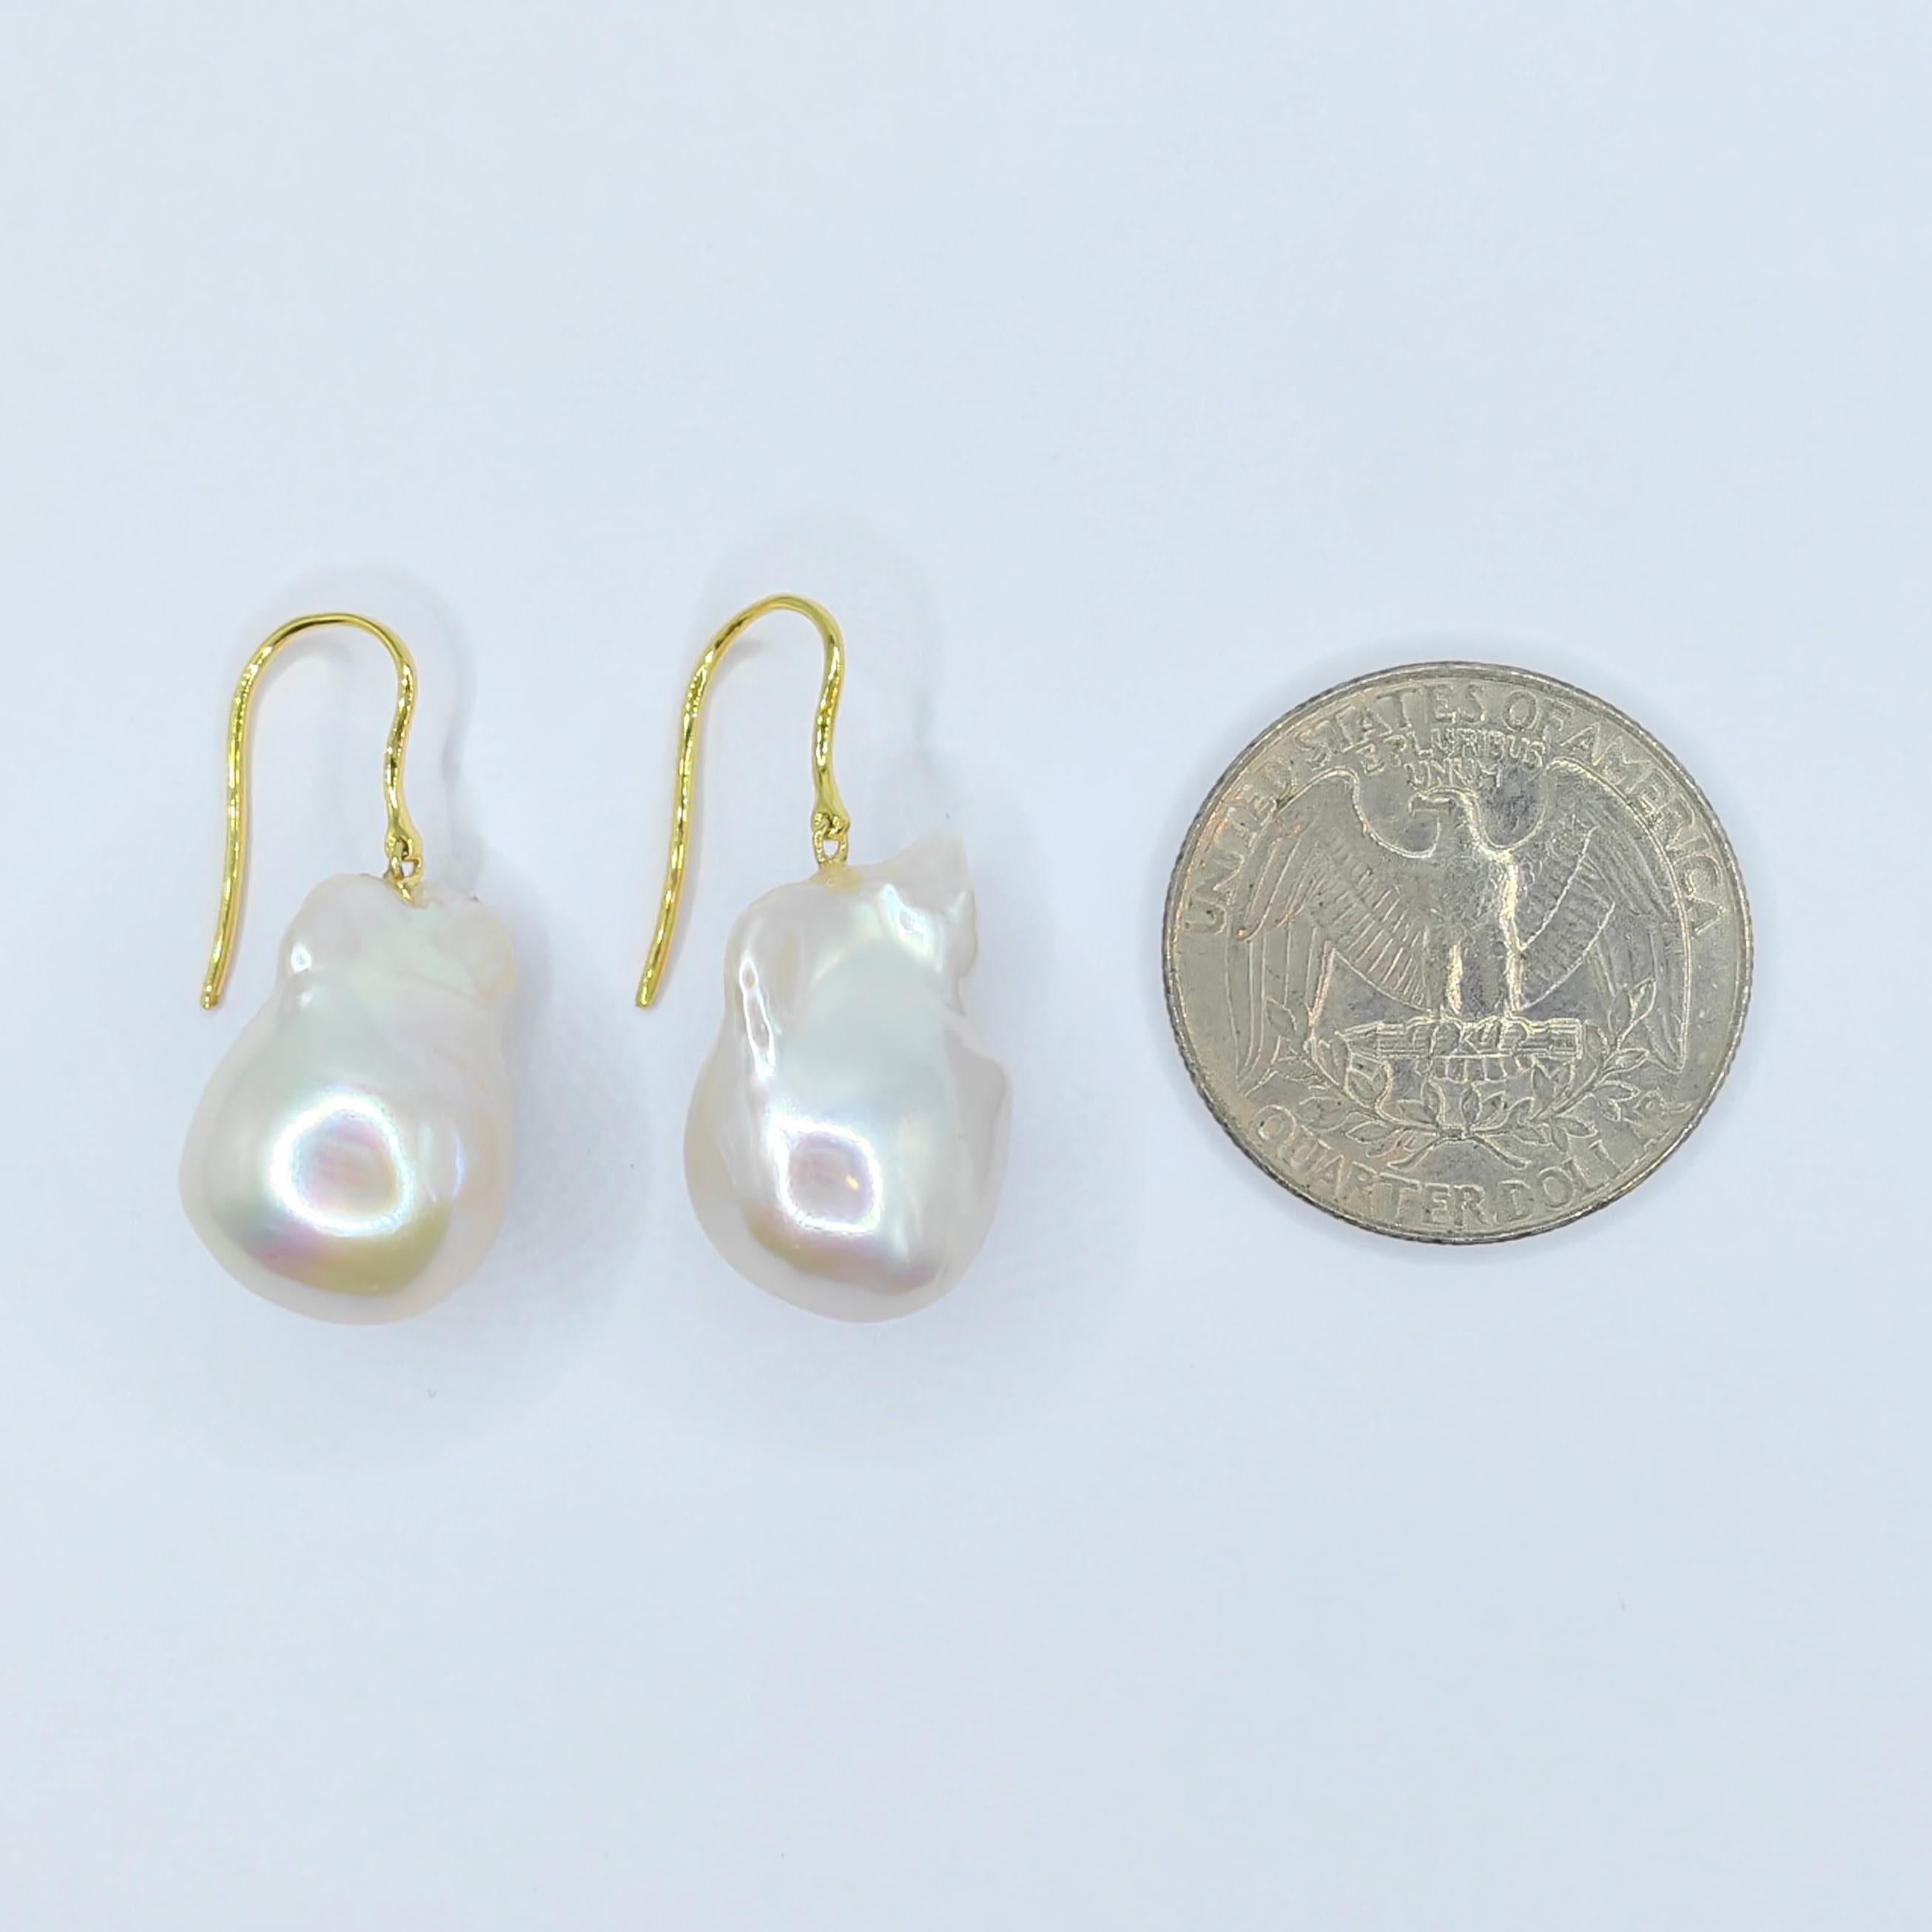 Iridescent Baroque Pearl Drop Earrings With 18K Yellow Gold French Hooks 2